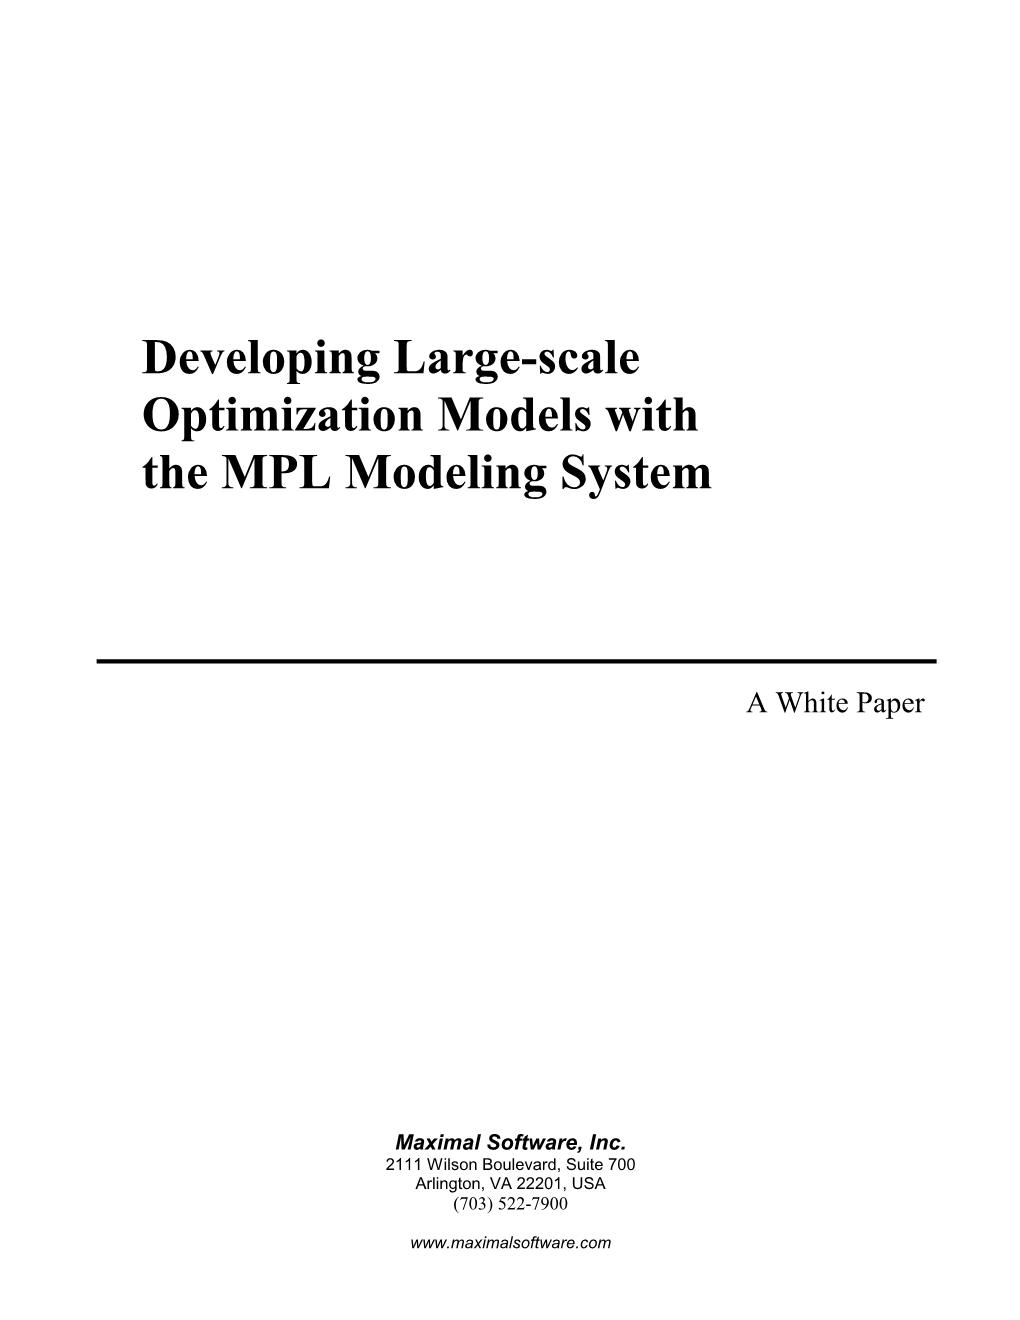 Developing Large-Scale Optimization Models with the MPL Modeling System